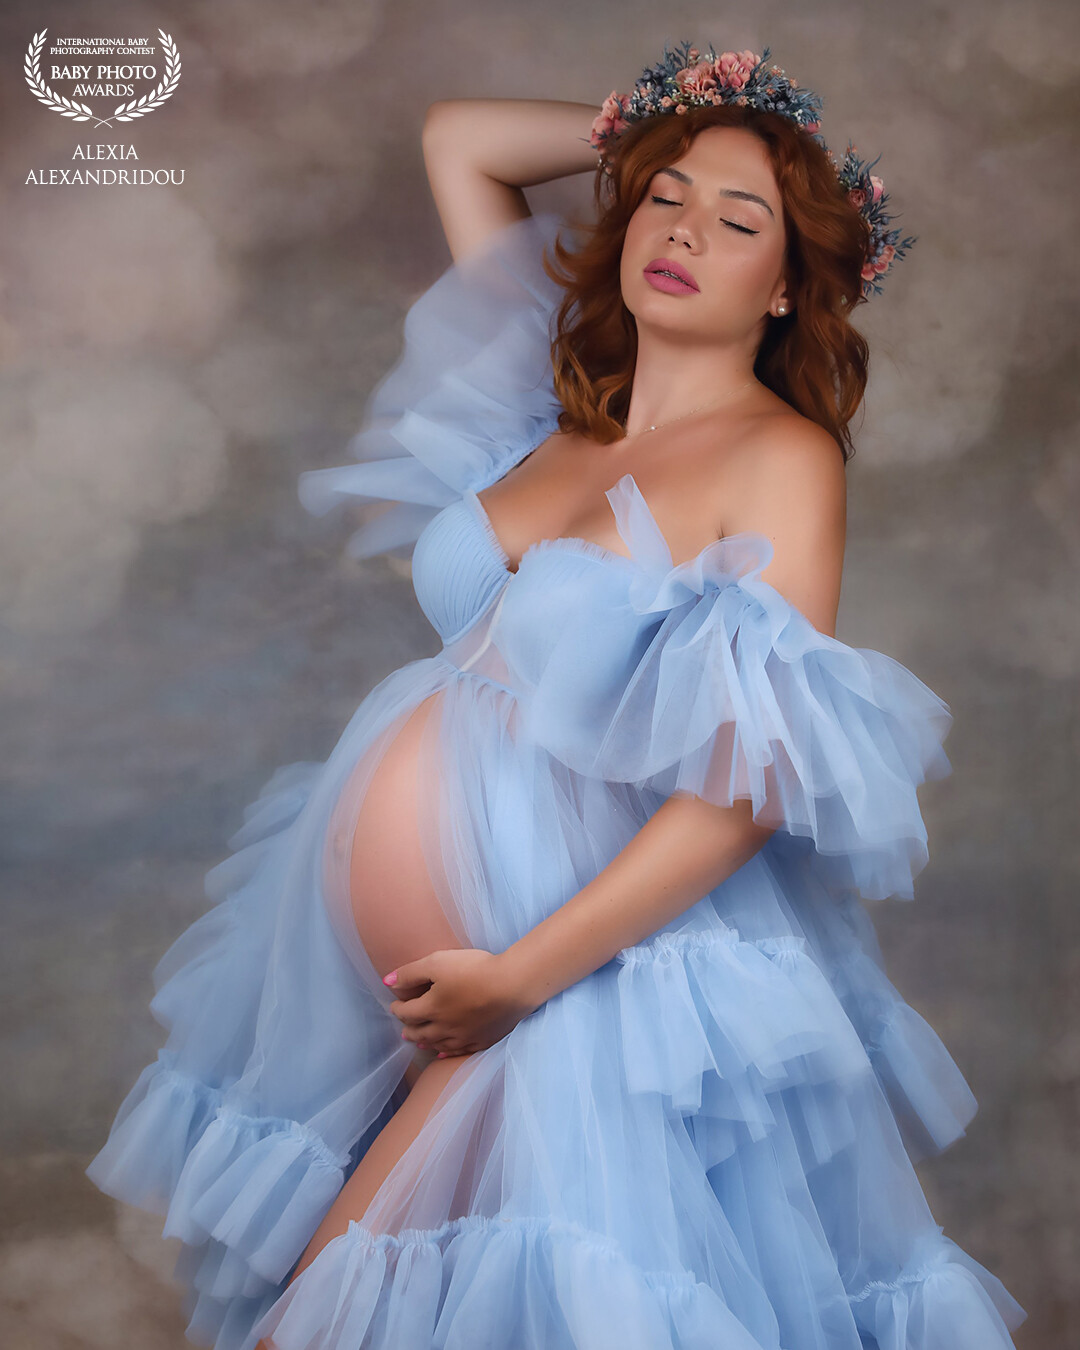 Capturing the radiant glow and the enchanting anticipation of motherhood. This  maternity photo session weaves a tale of love, grace, and the magic of new beginnings.